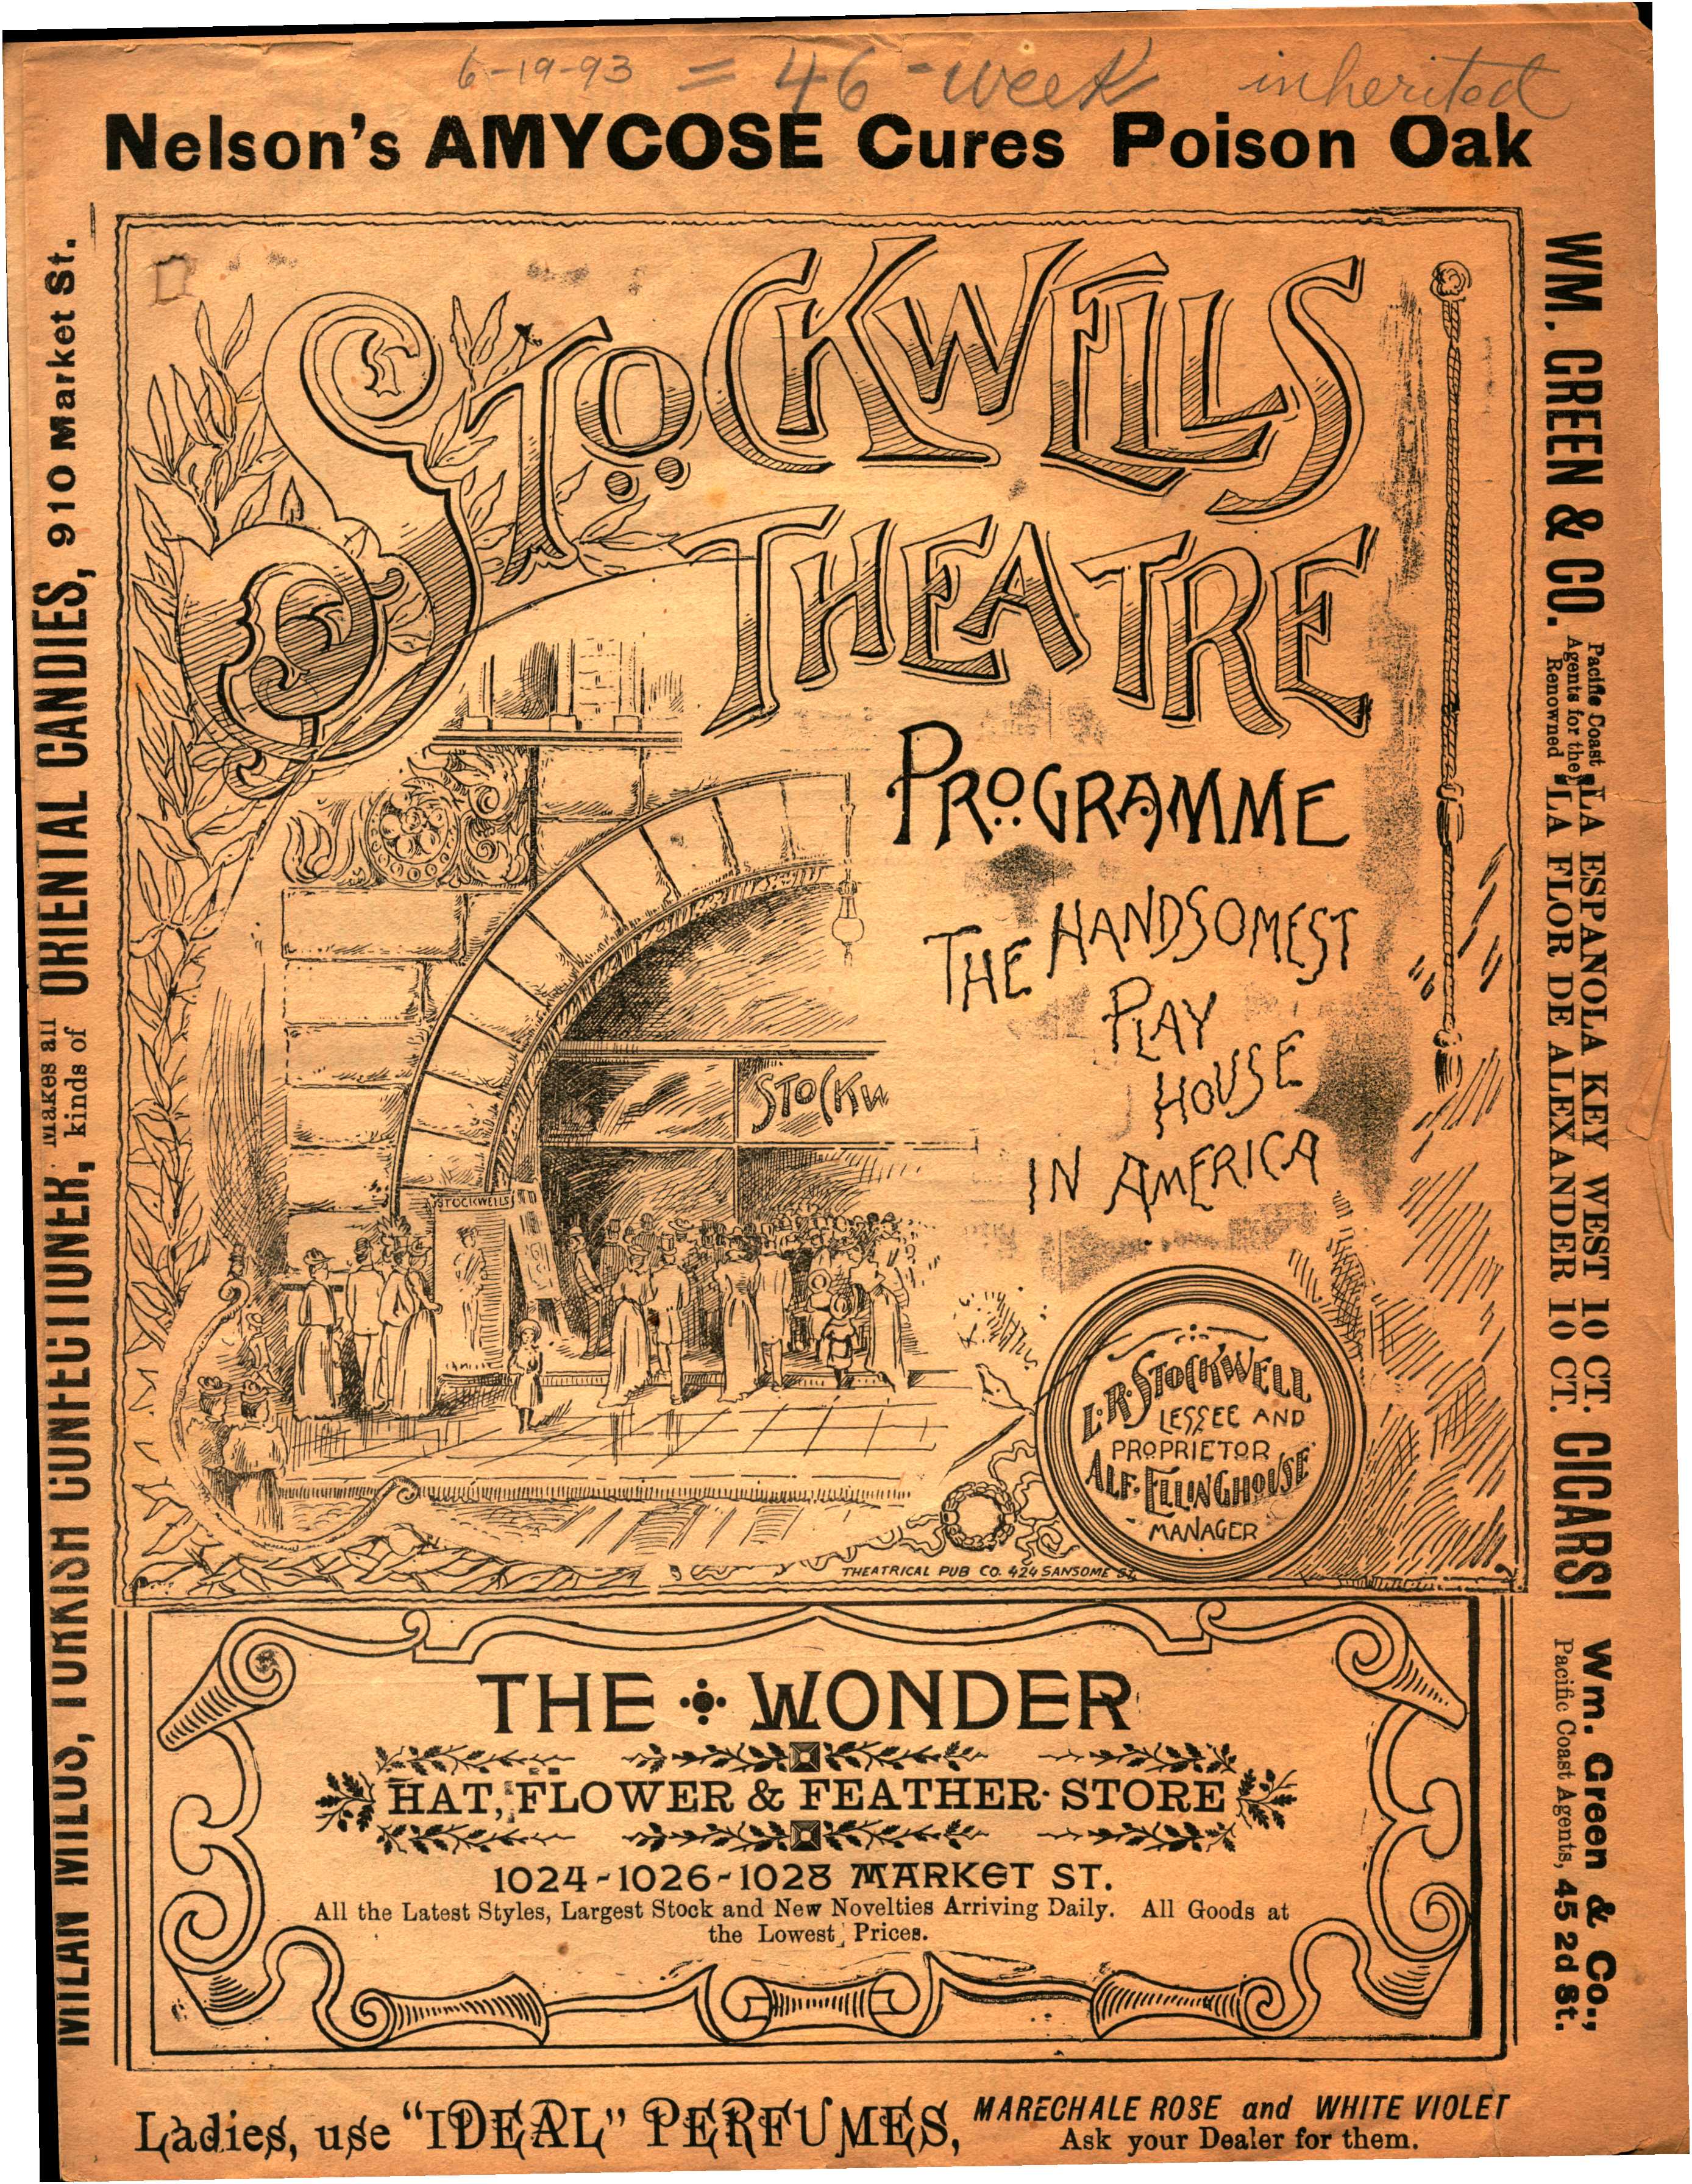 Front cover shows people walking into the theatre, theatre information and a few advertisements